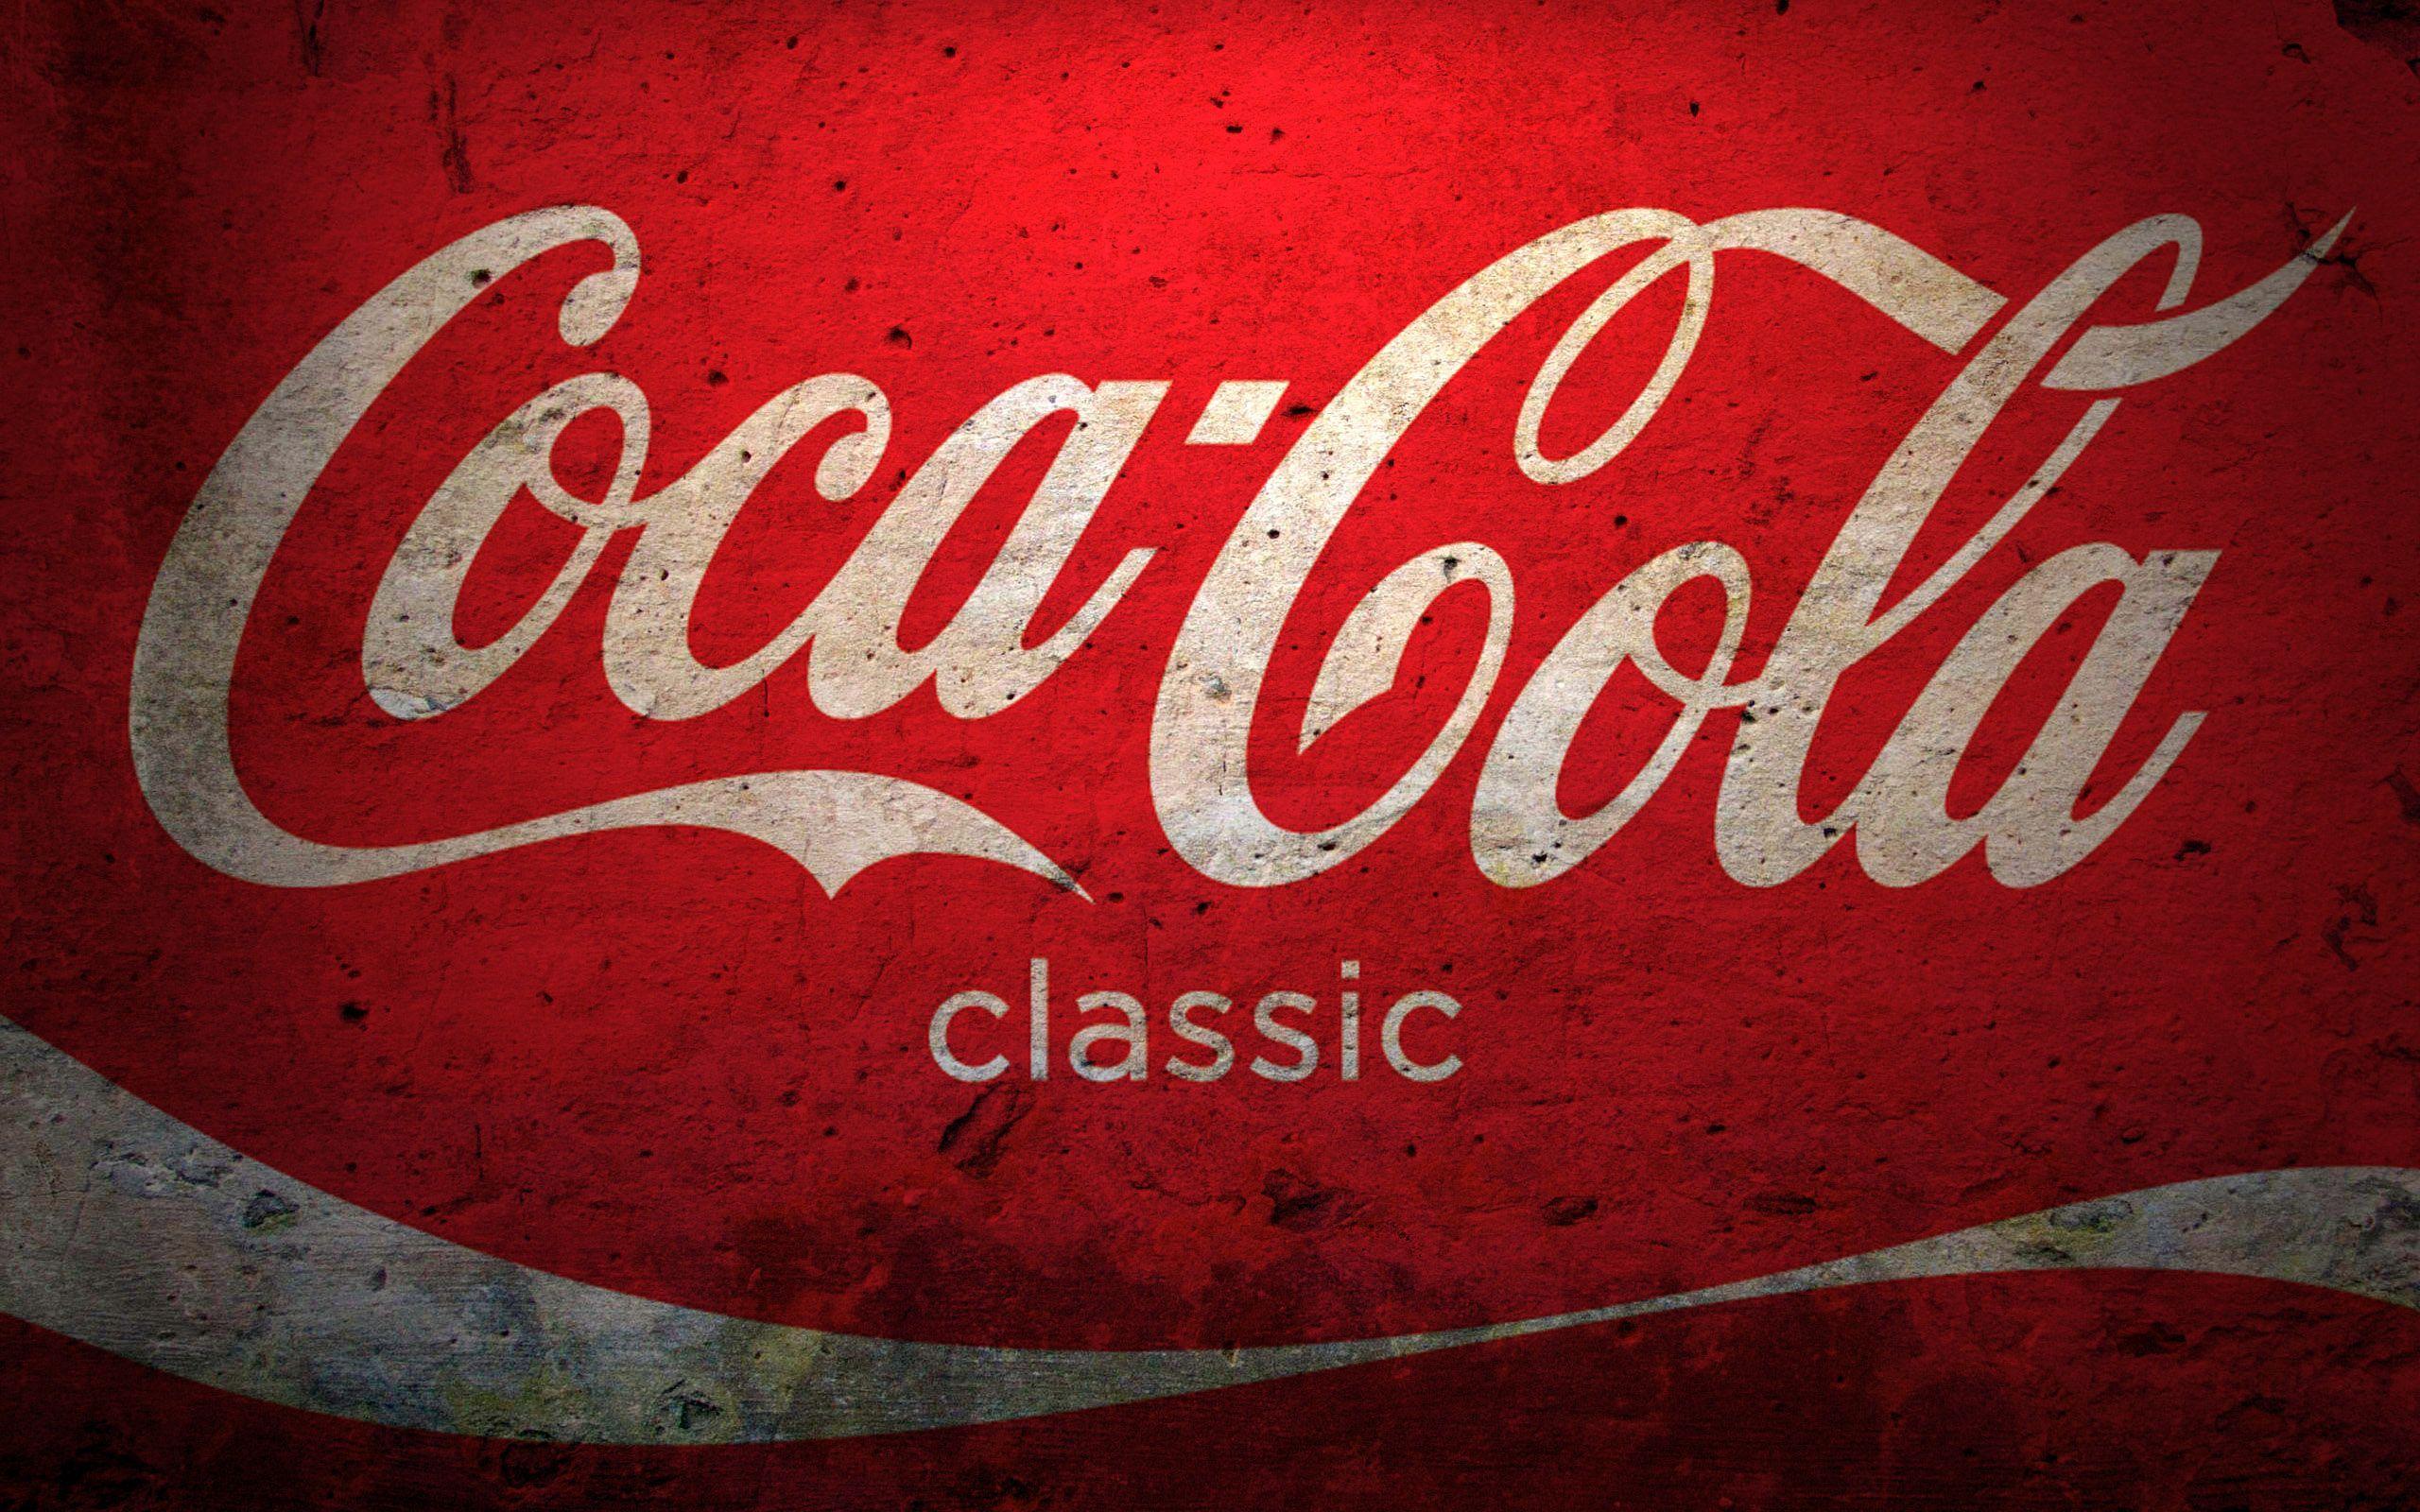 Collection of Coca Cola Wallpaper on Spyder Wallpaper